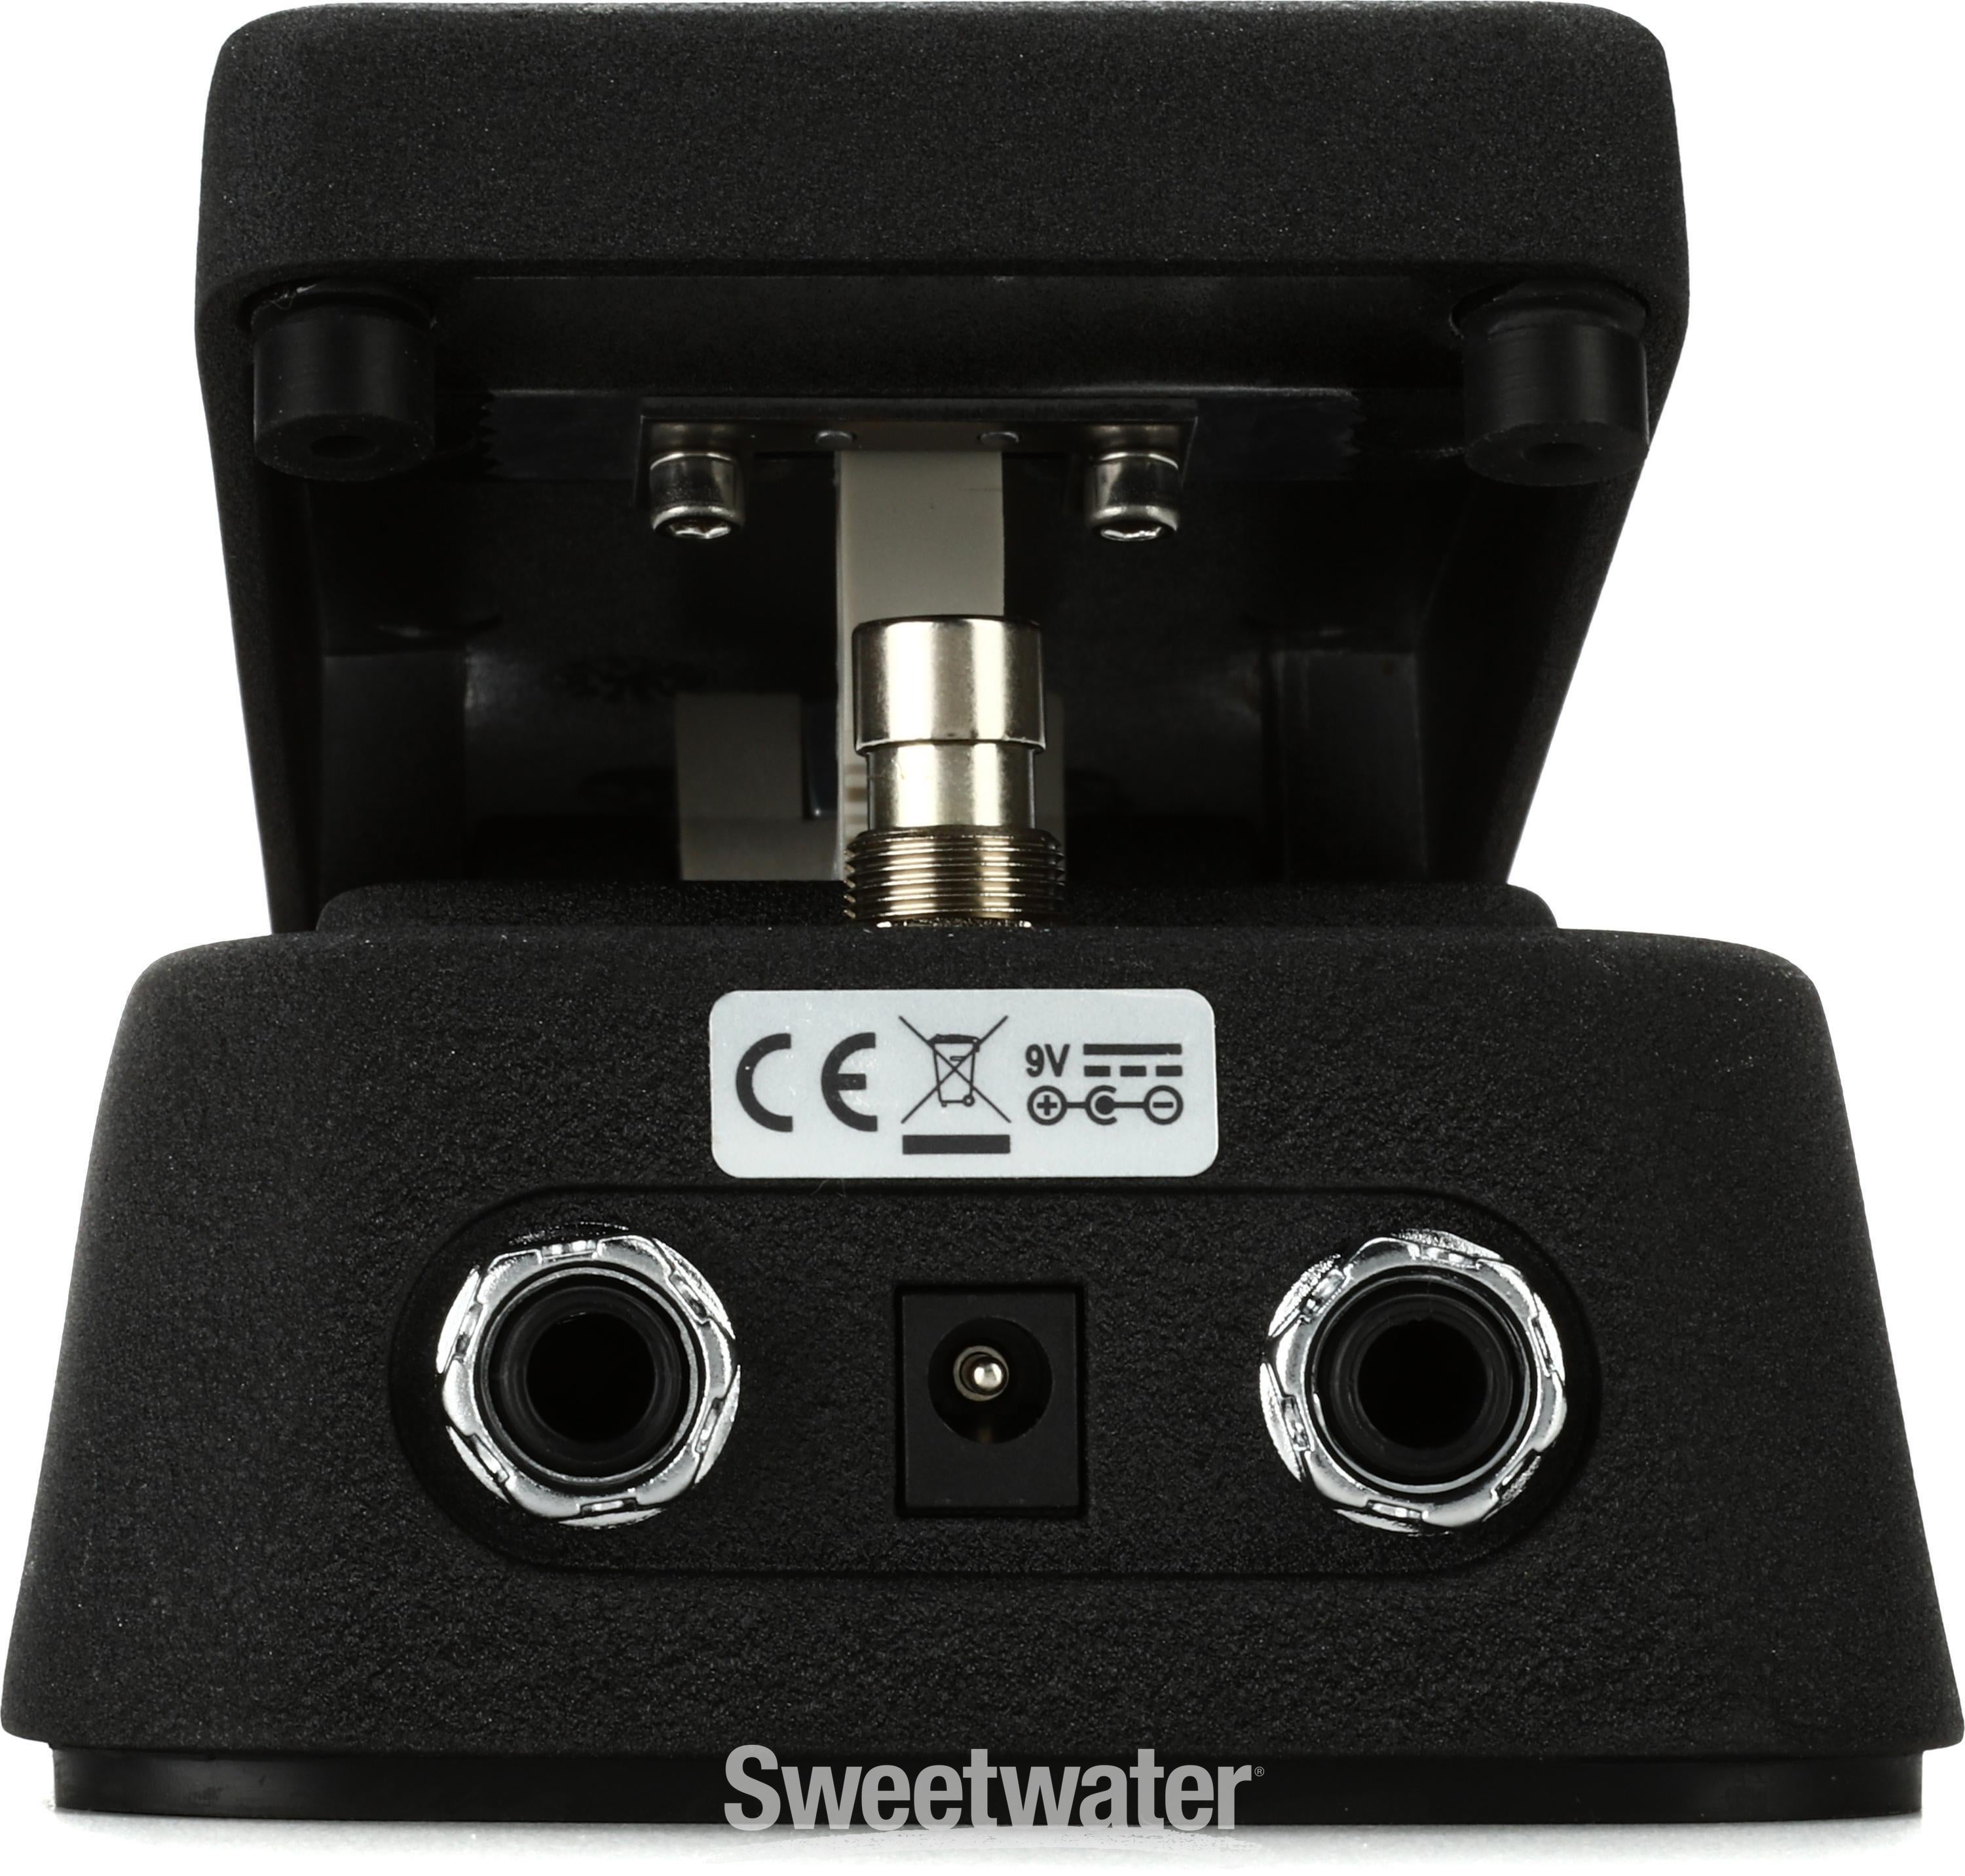 Dunlop CBJ95 Cry Baby Junior Wah Pedal | Sweetwater